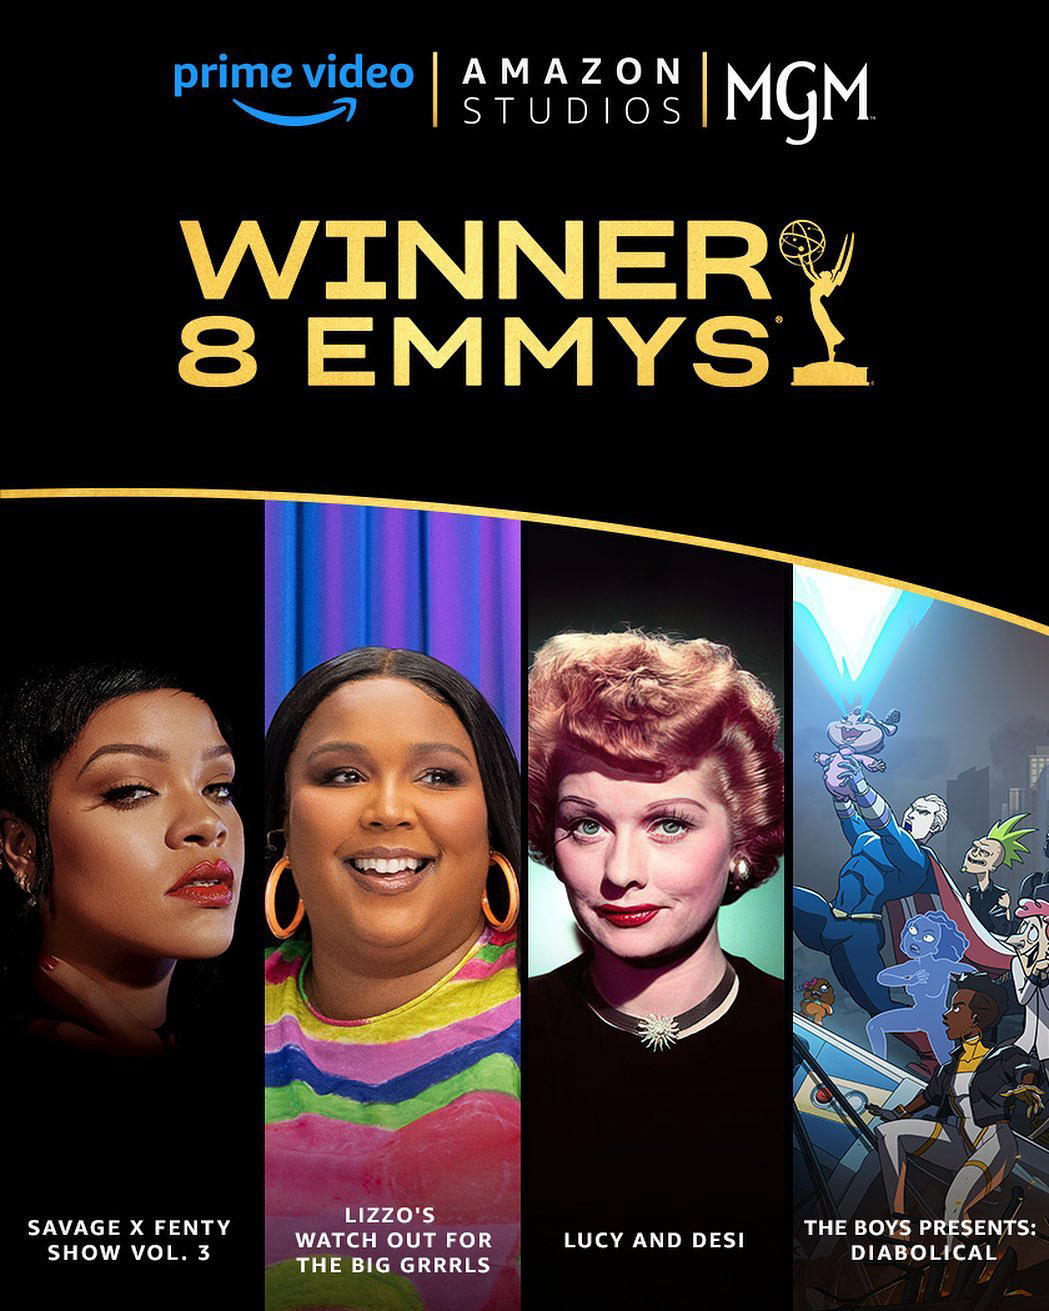 image  1 Prime Video - We are ecstatic for all of our #Emmys winners this year